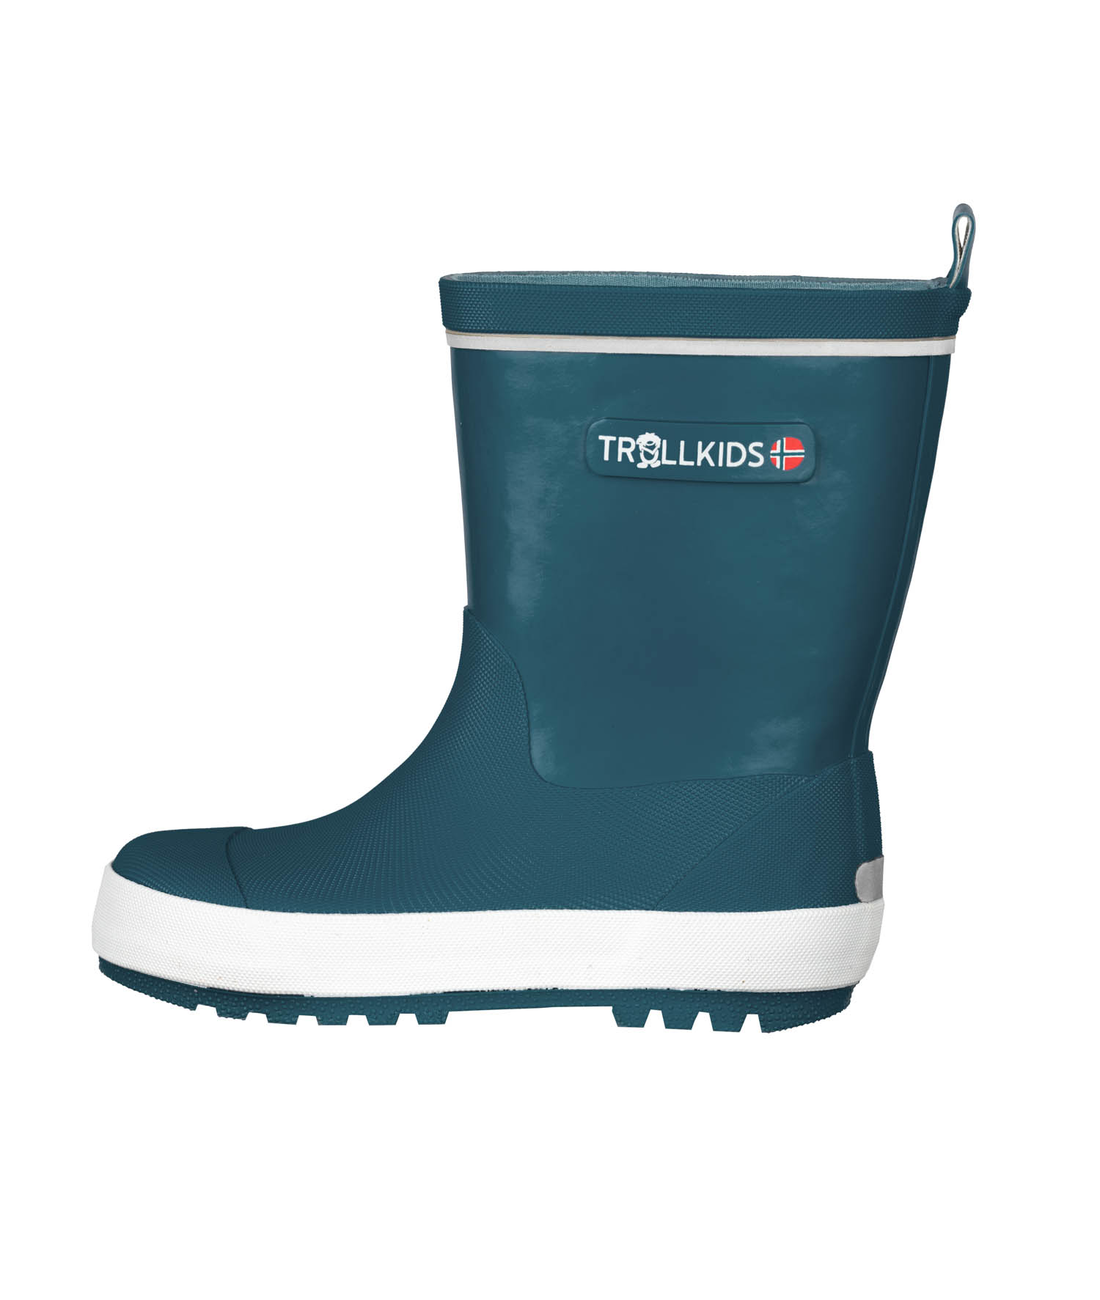 Lysefjord Rubber Boot